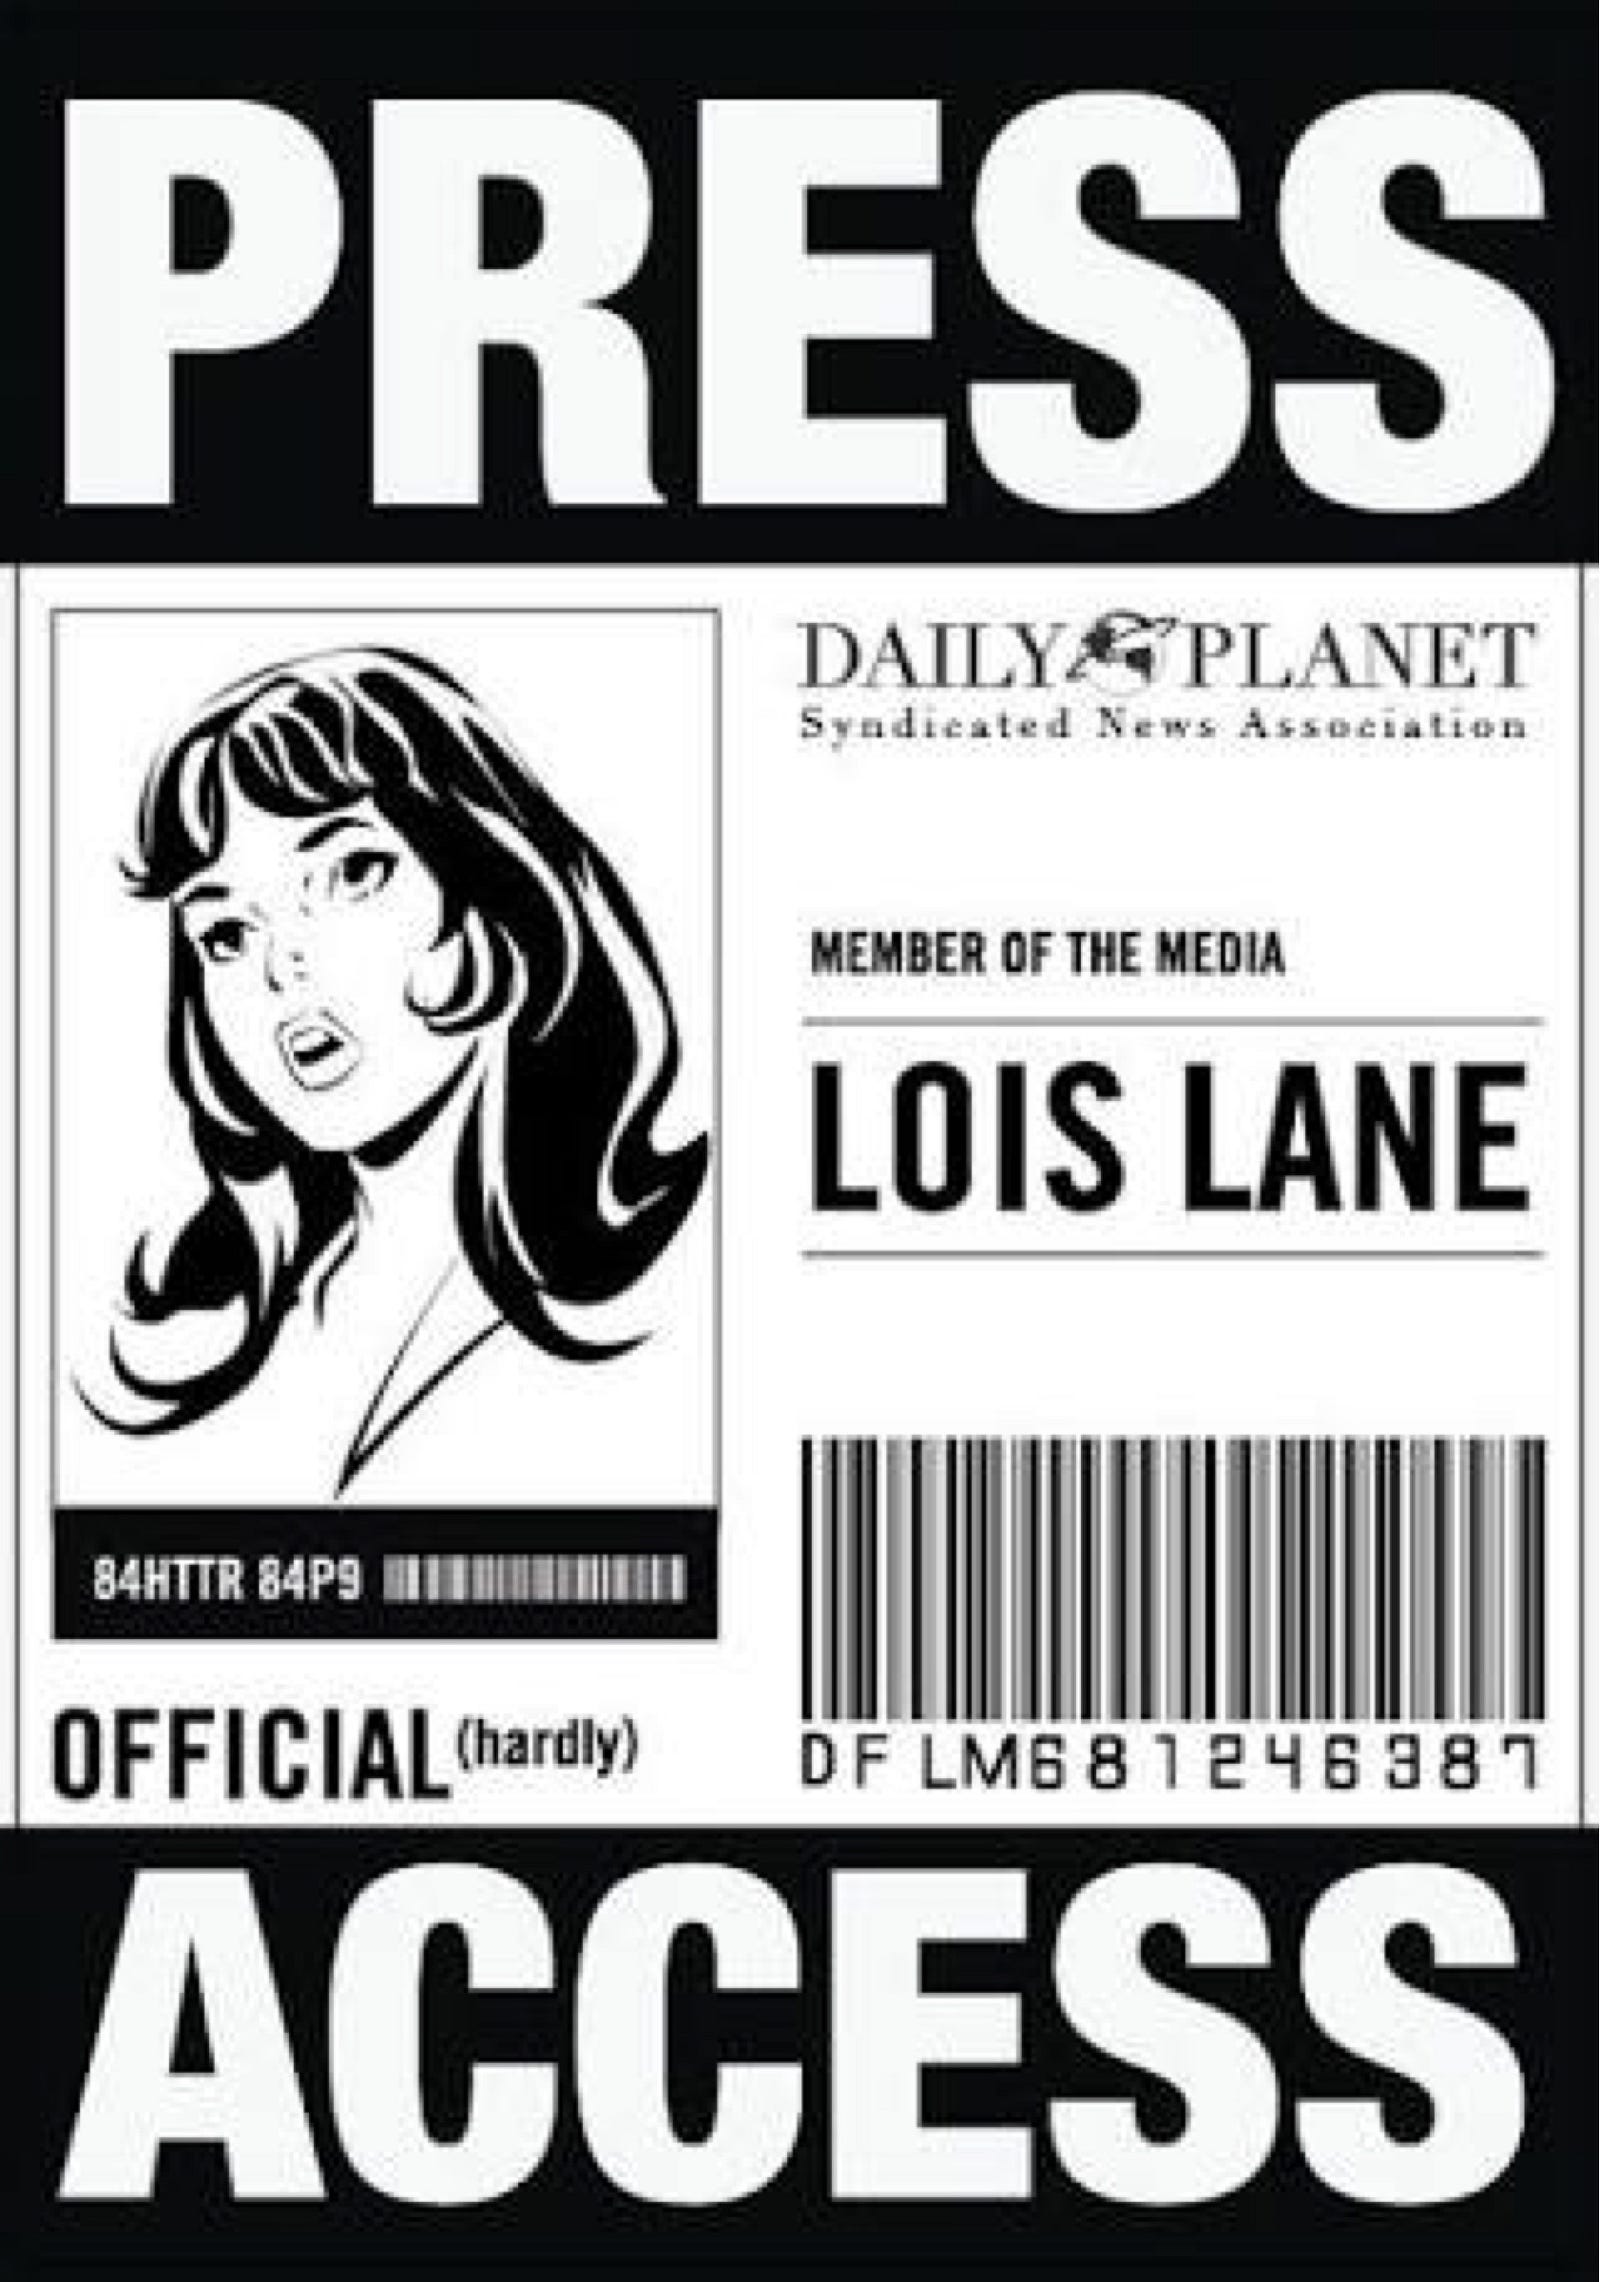 lois-lane-s-character-set-a-few-unrealistic-standards-for-female